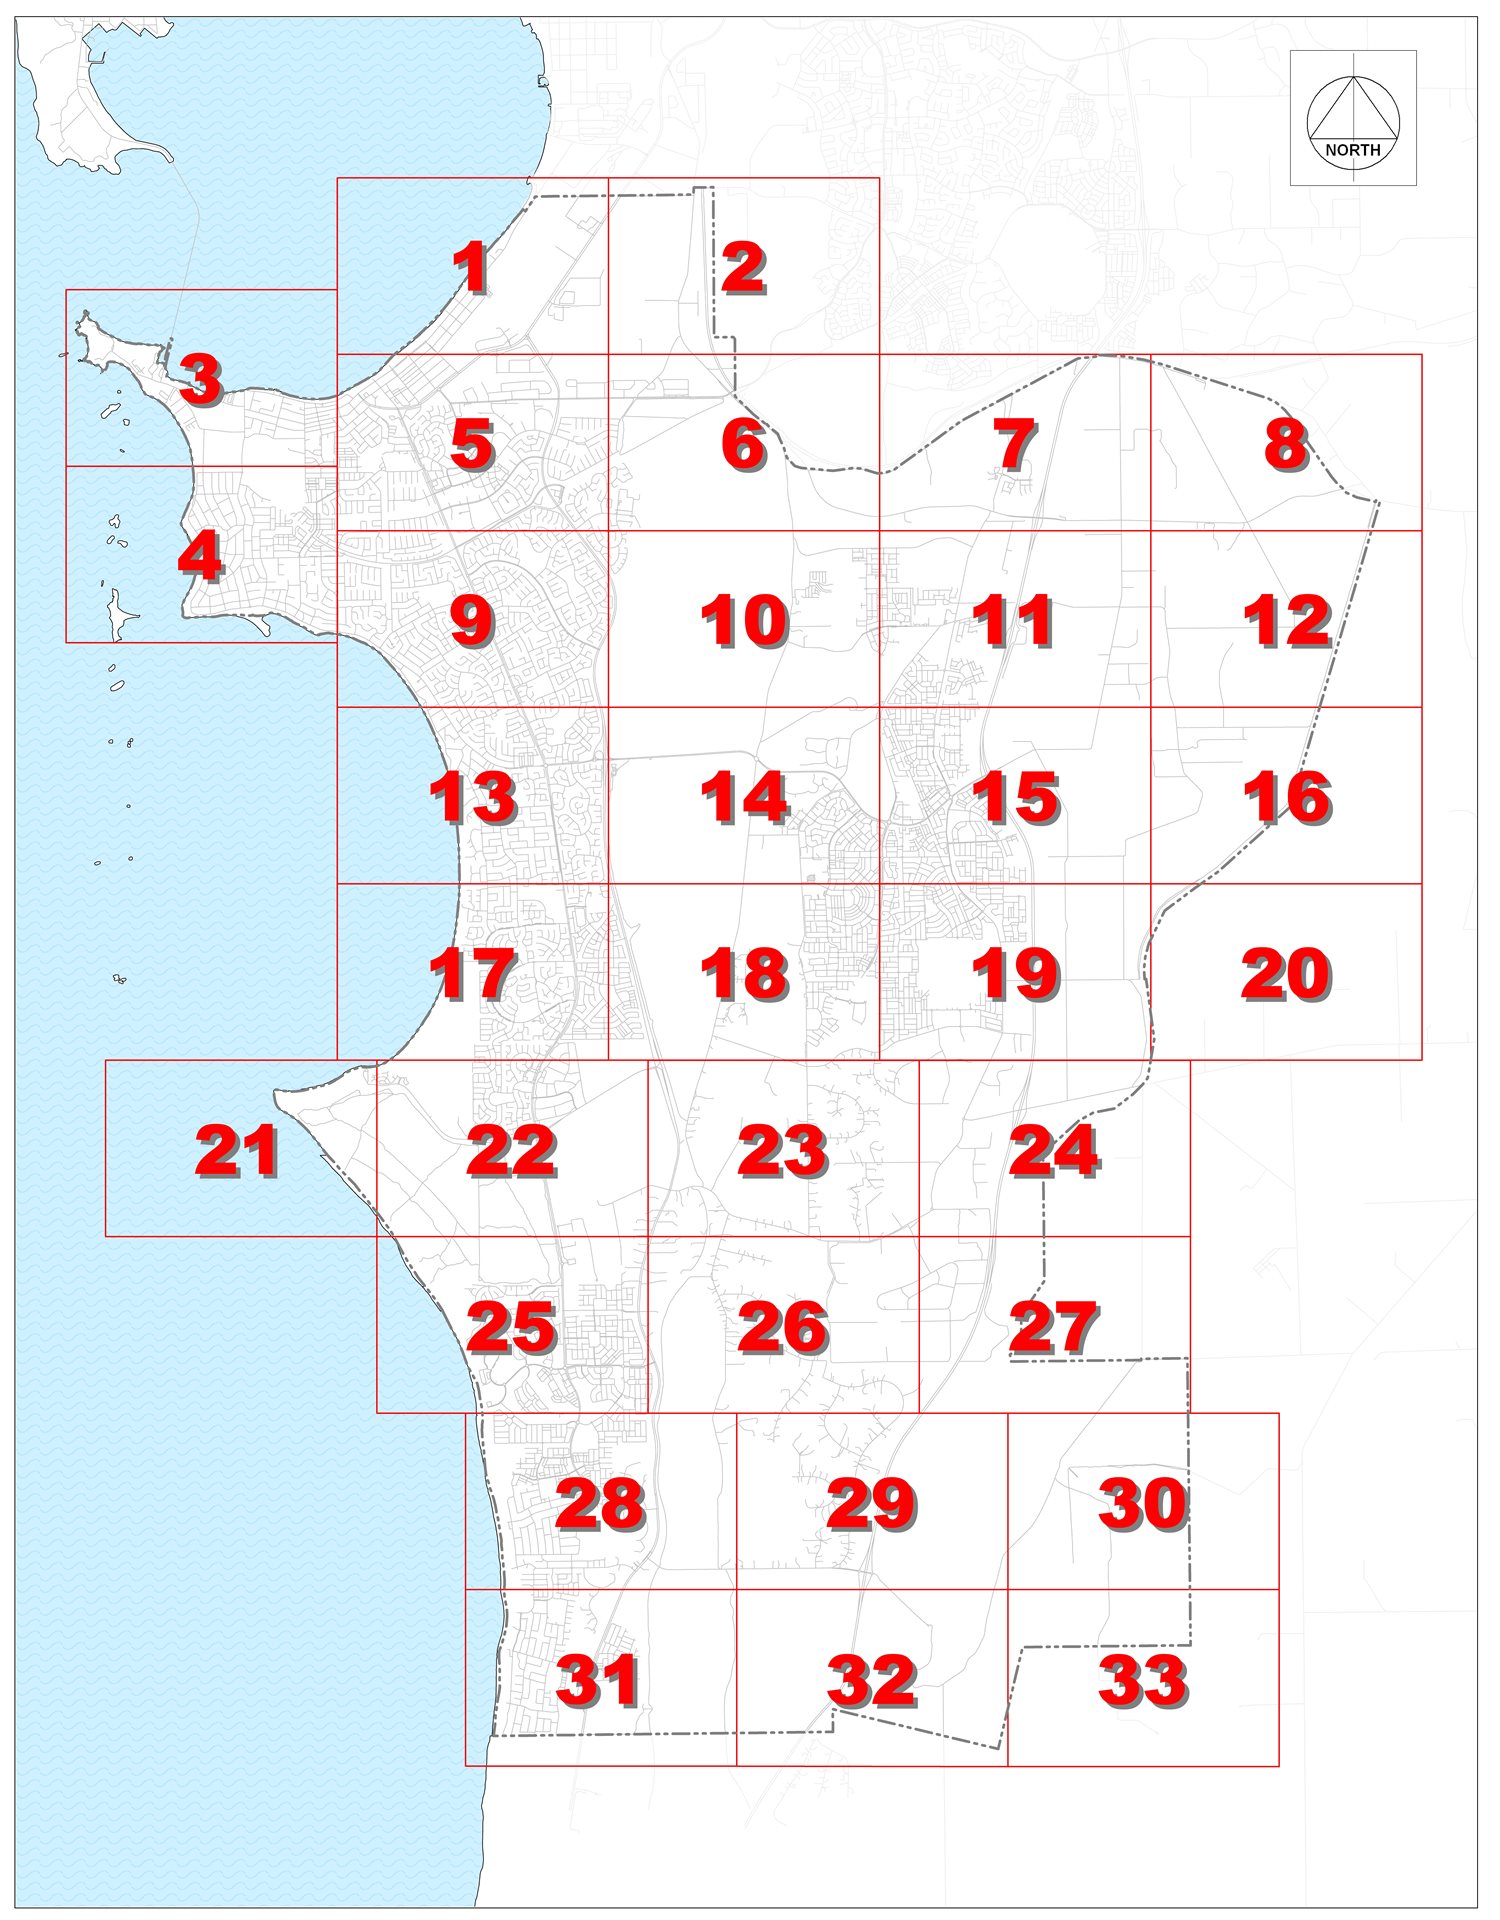 Map showing the 21 planning zones in the City